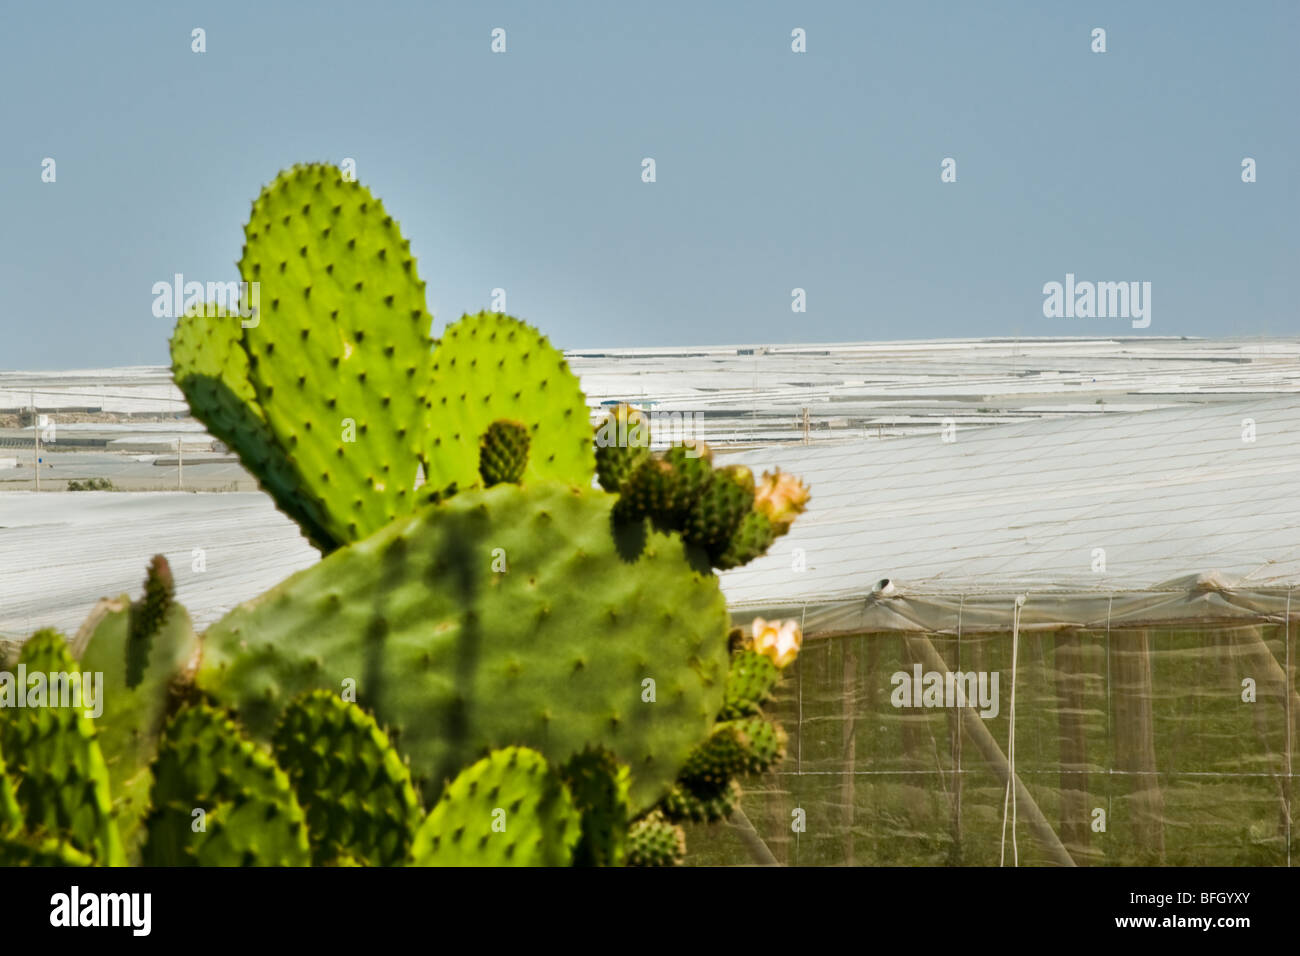 Intensive agriculture in El Ejido (Spain) depends on the sophisticated irrigation system. Stock Photo